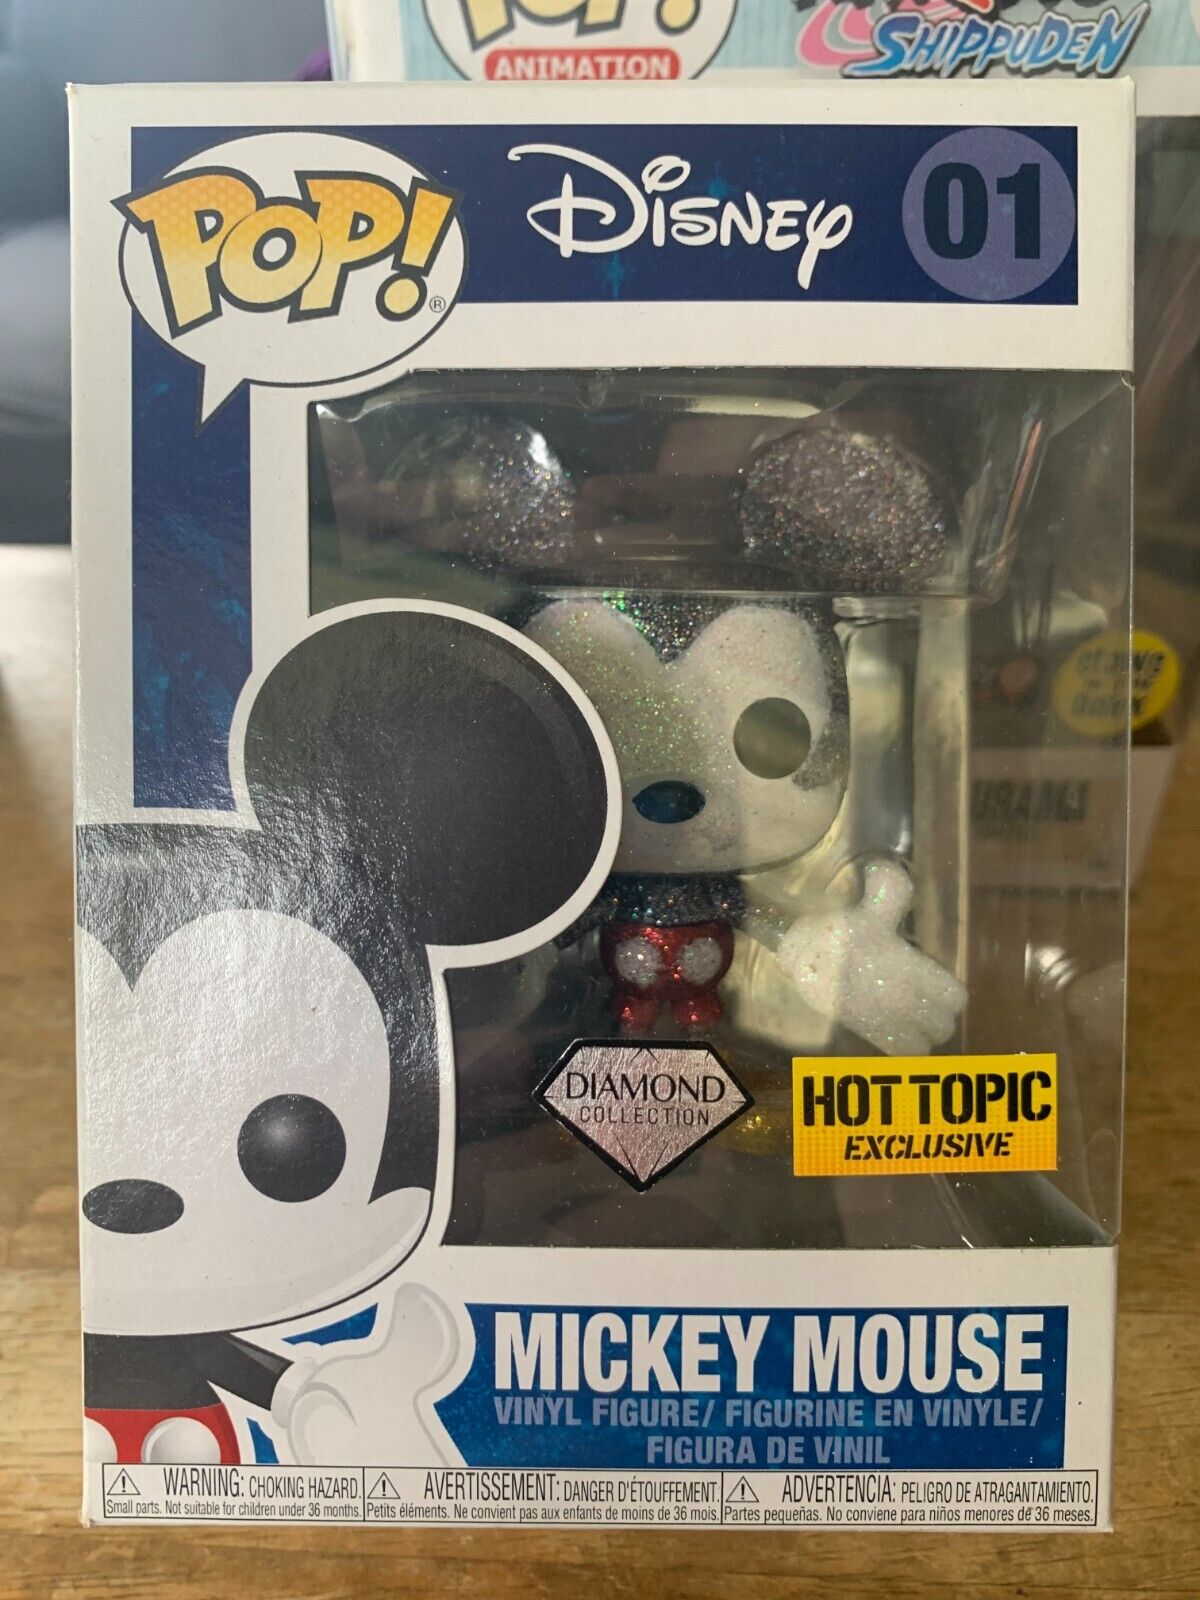 Funko POP Disney DIAMOND COLLECTION MICKEY MOUSE Hot Topic Exclusive 